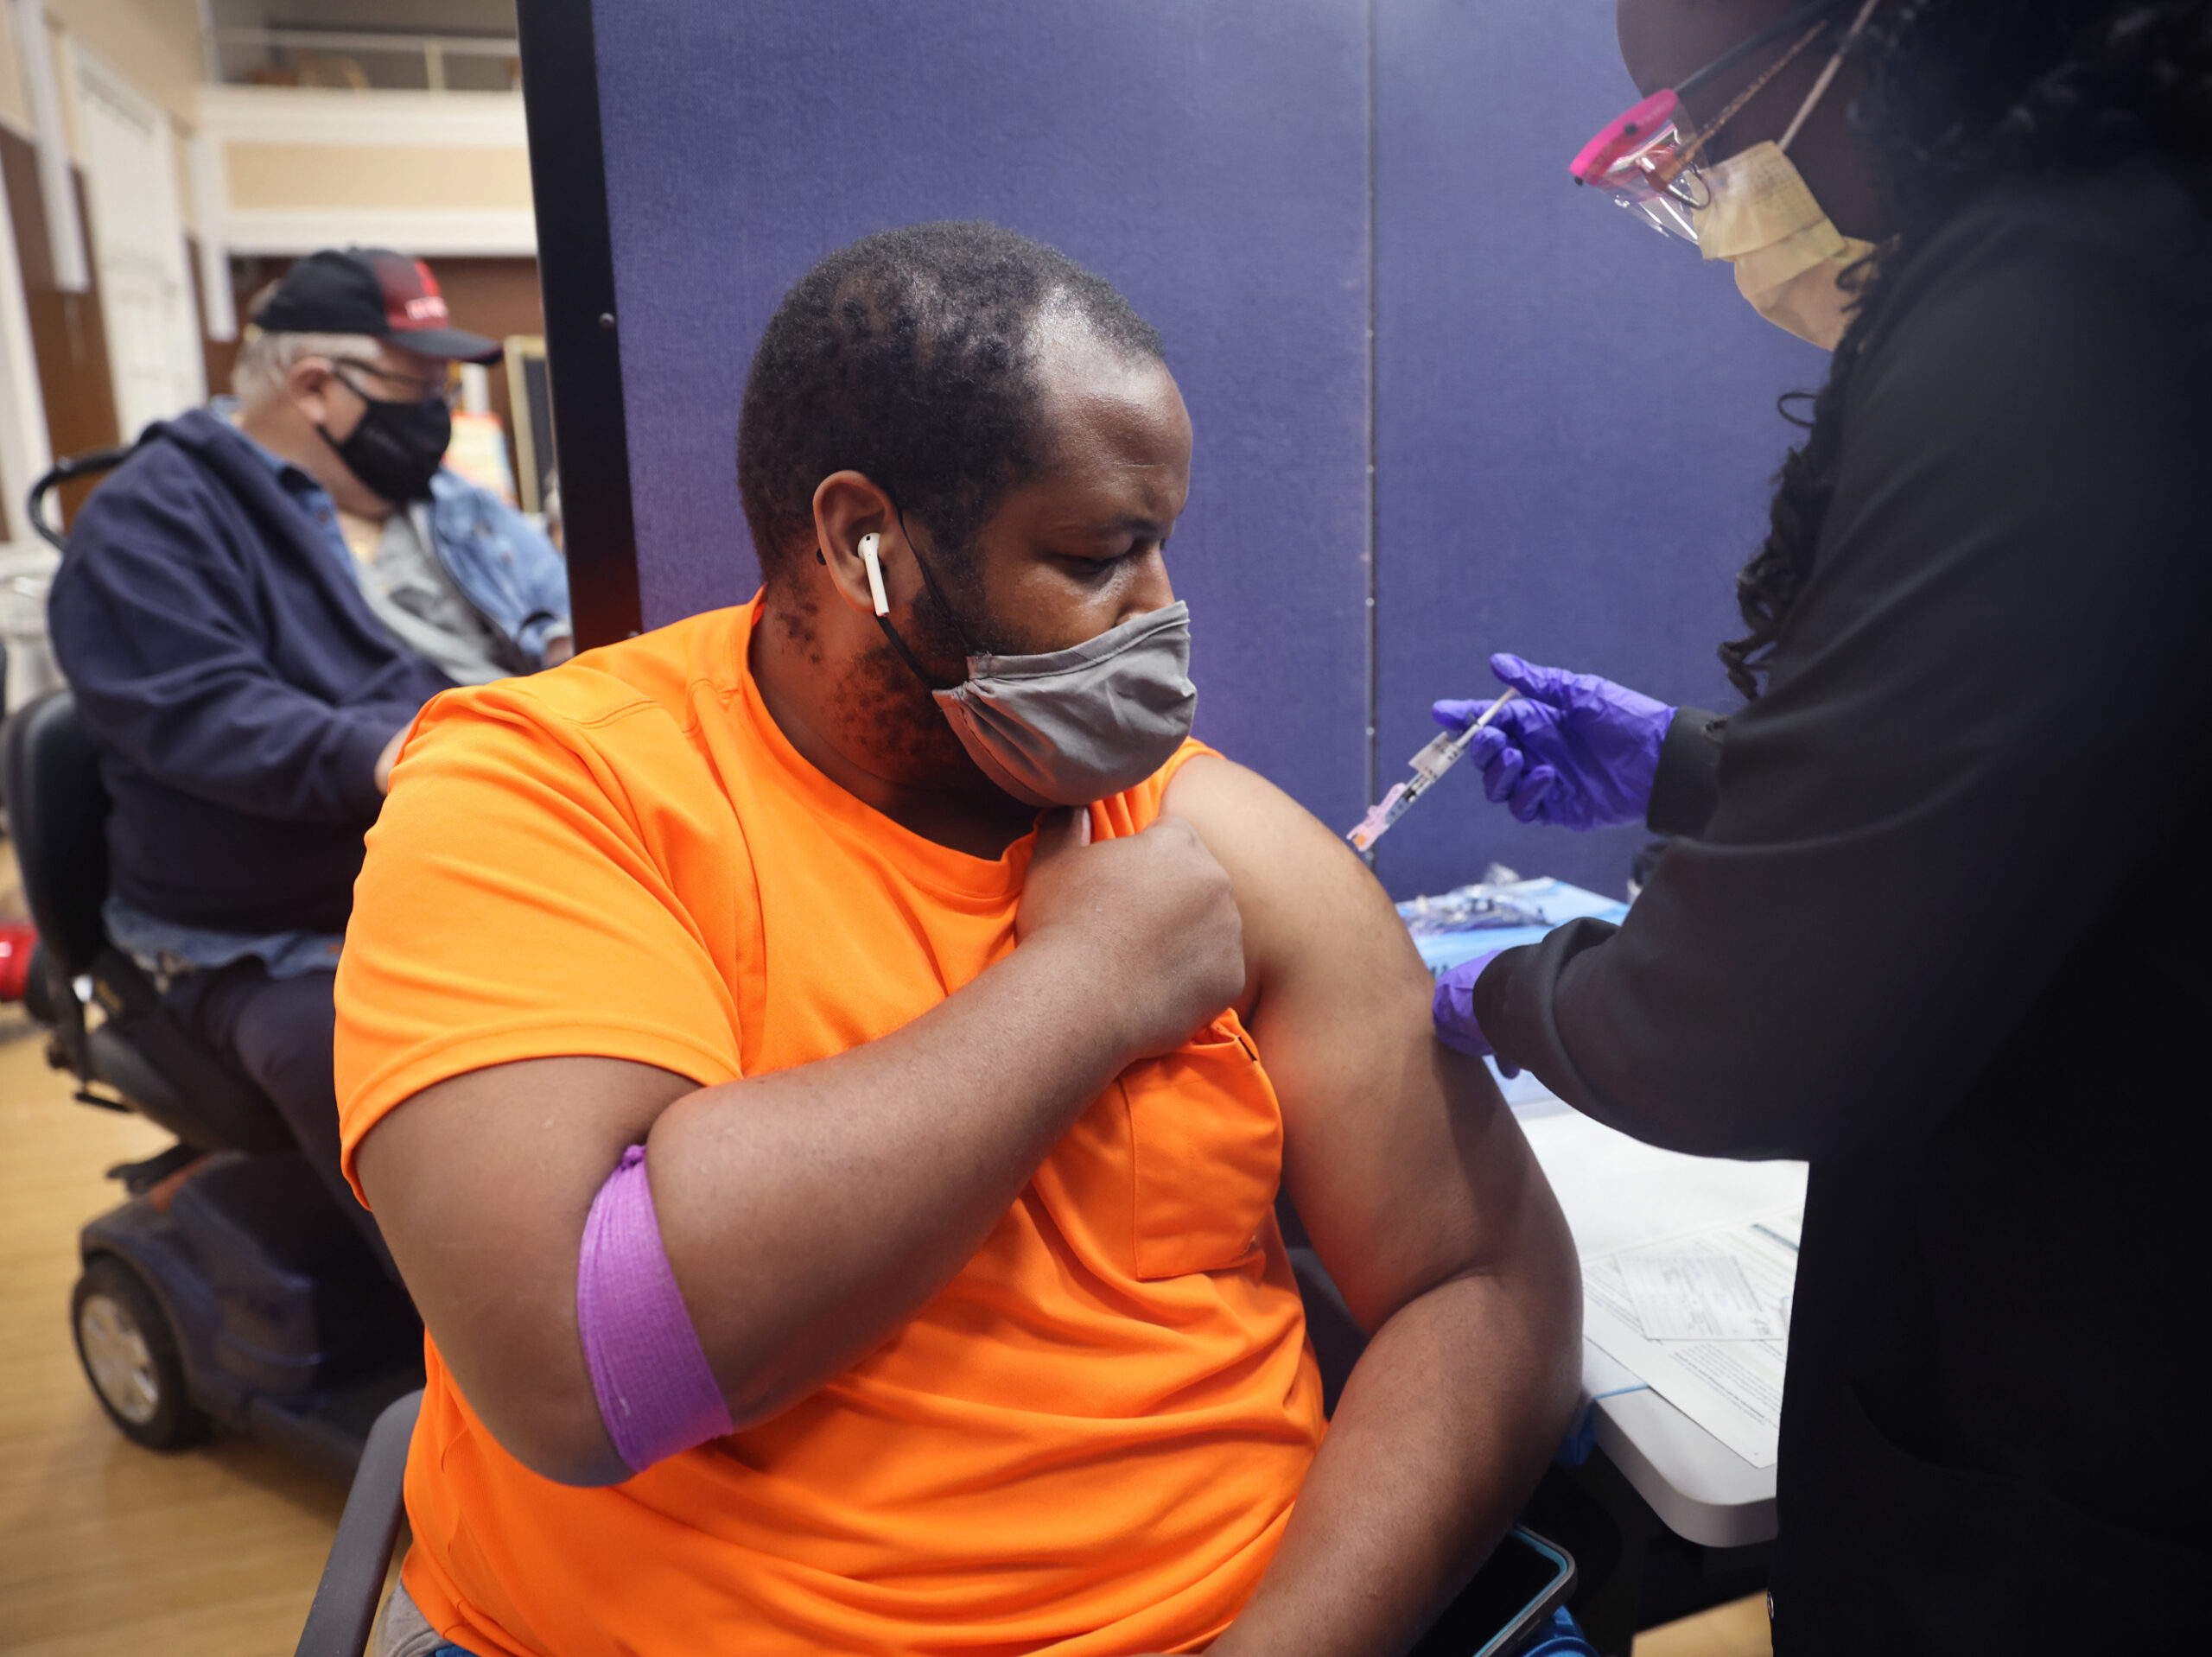 A man in an orange shirt lifts up his sleeve to get a shot.